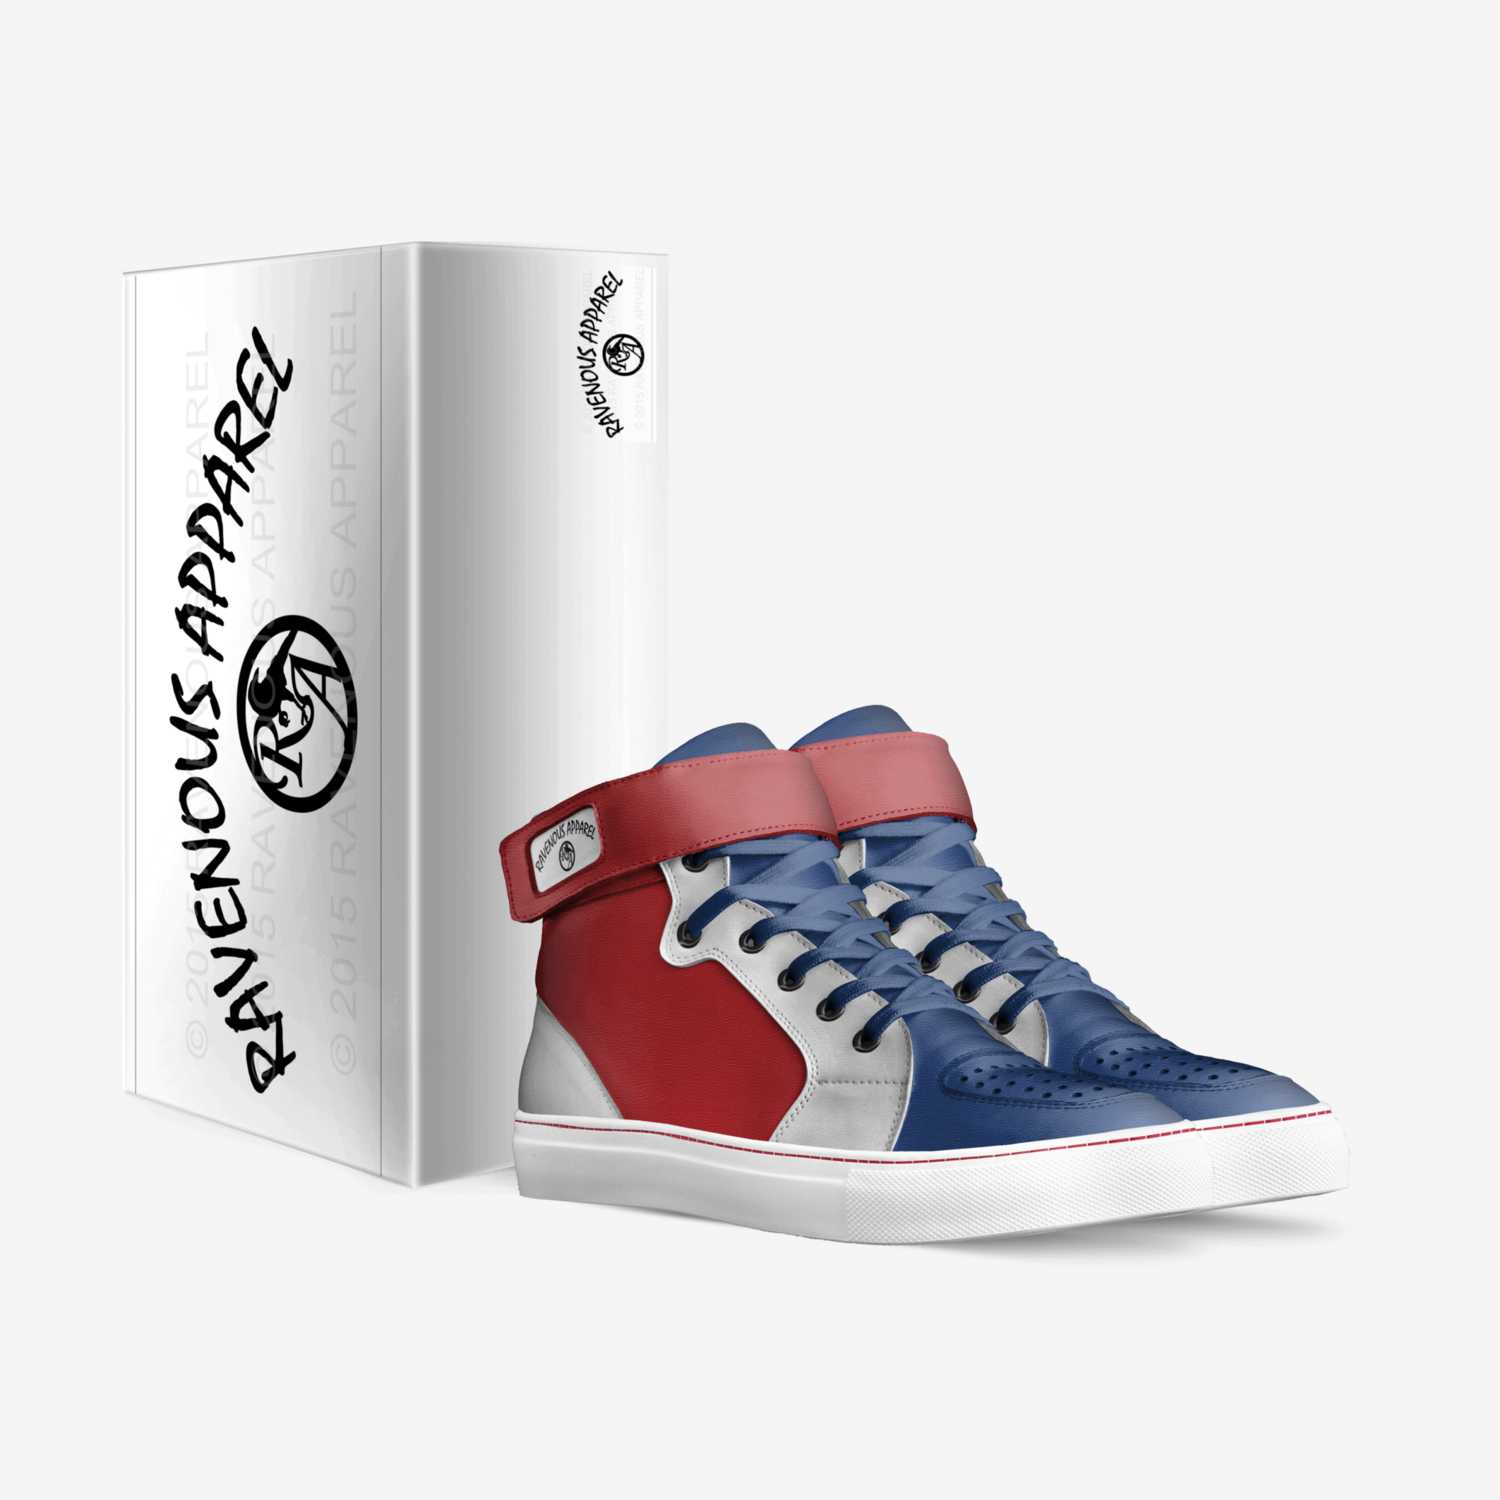 RAVENOUS1S/RWB custom made in Italy shoes by Thomas Rodriguez | Box view